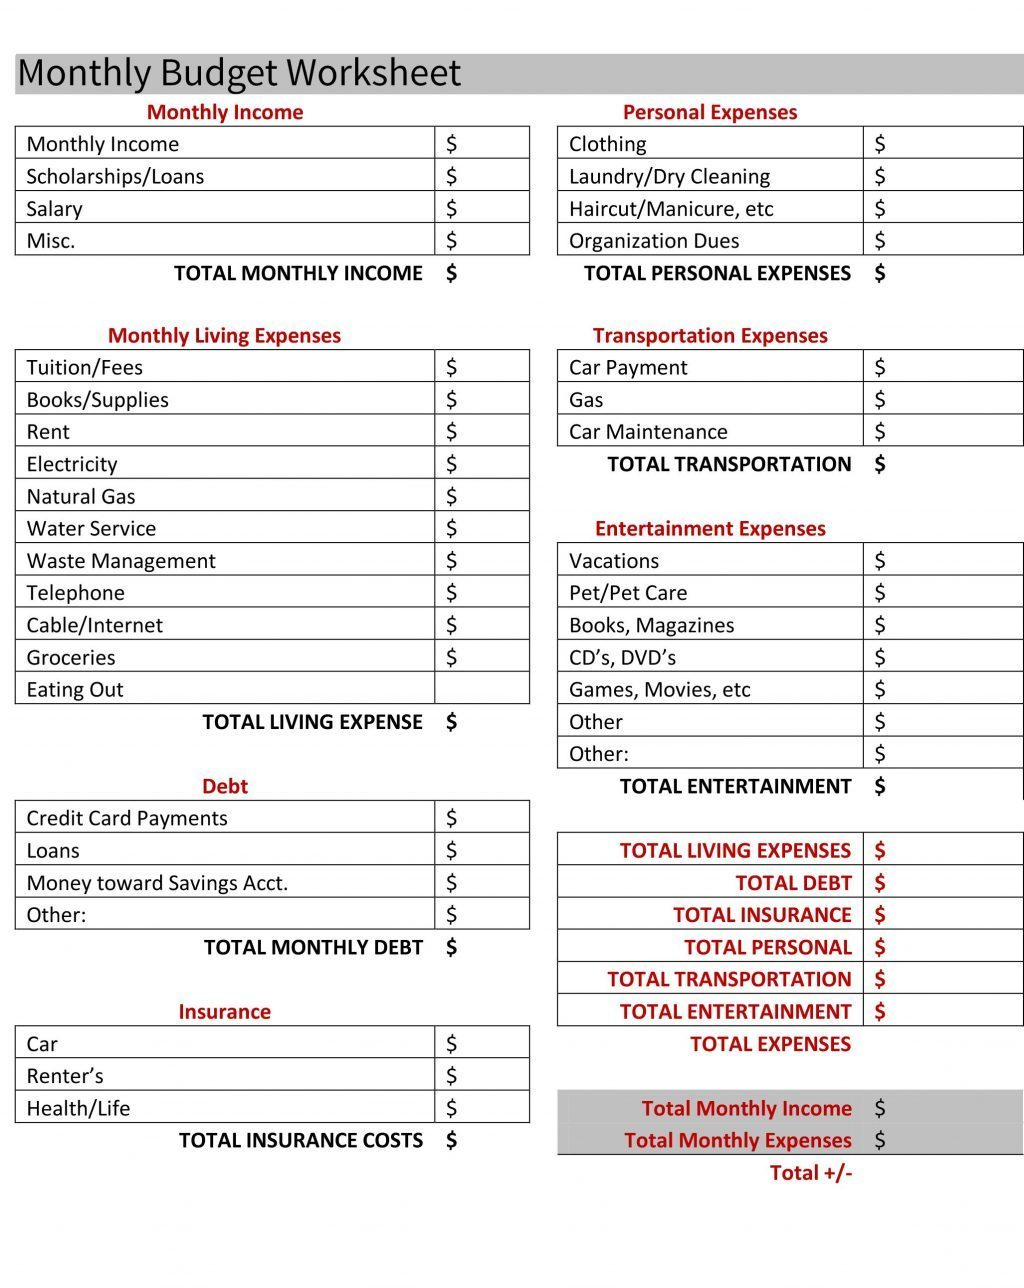 Save Money Budget Spreadsheet Within Save Money Budget Spreadsheet Sheet Monthly Saving Expertr Moms